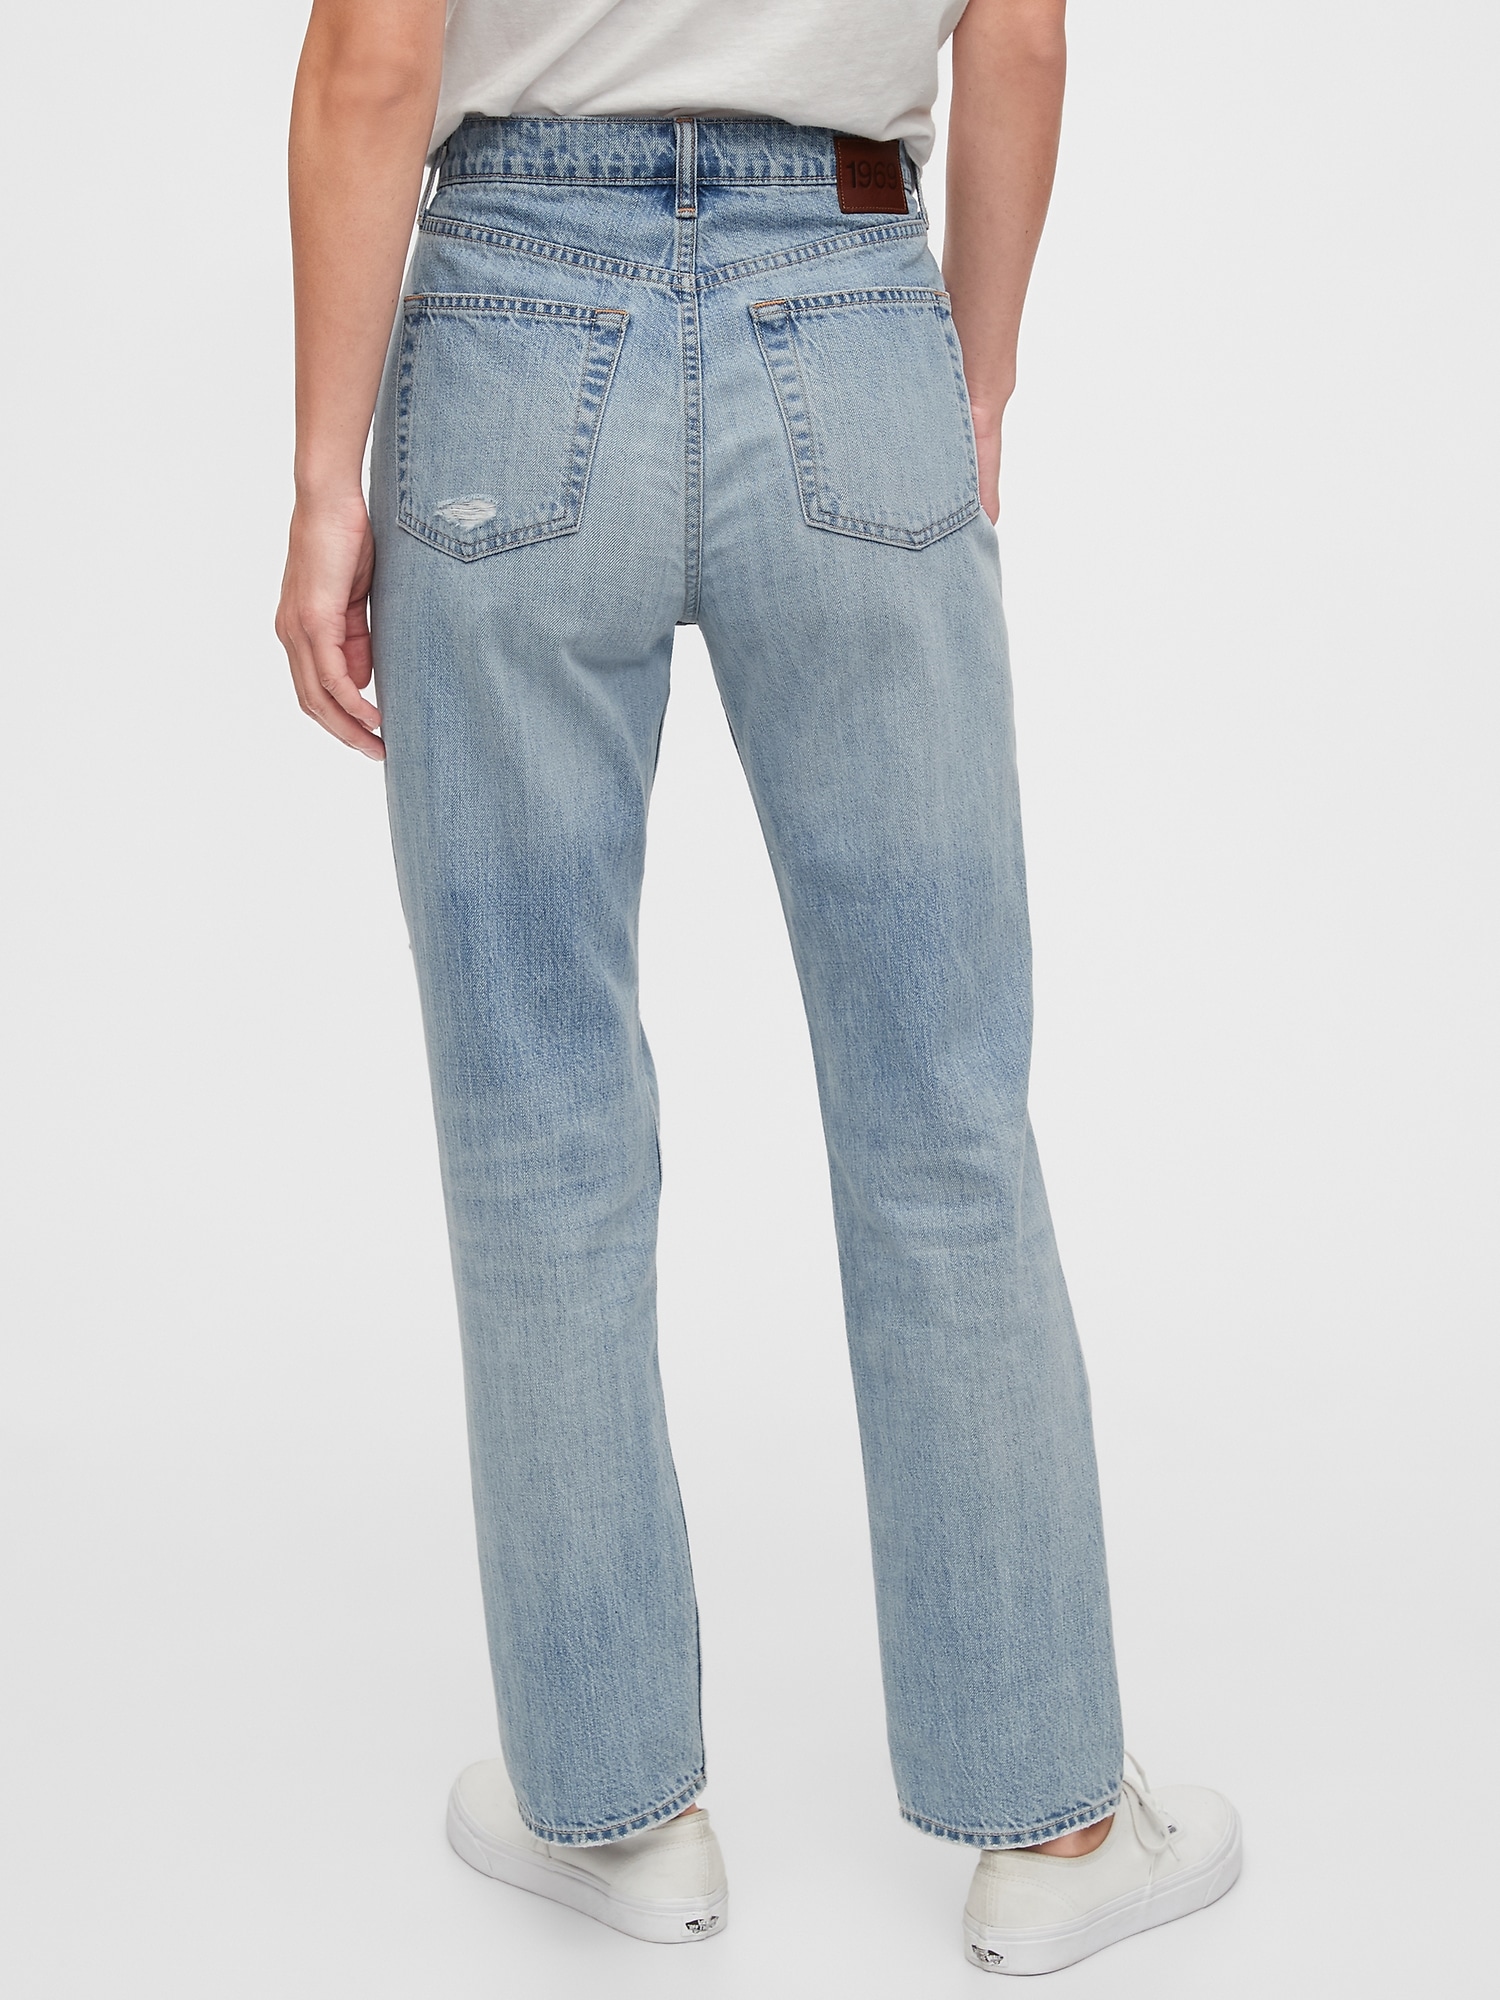 gap jeans 1969 straight fit